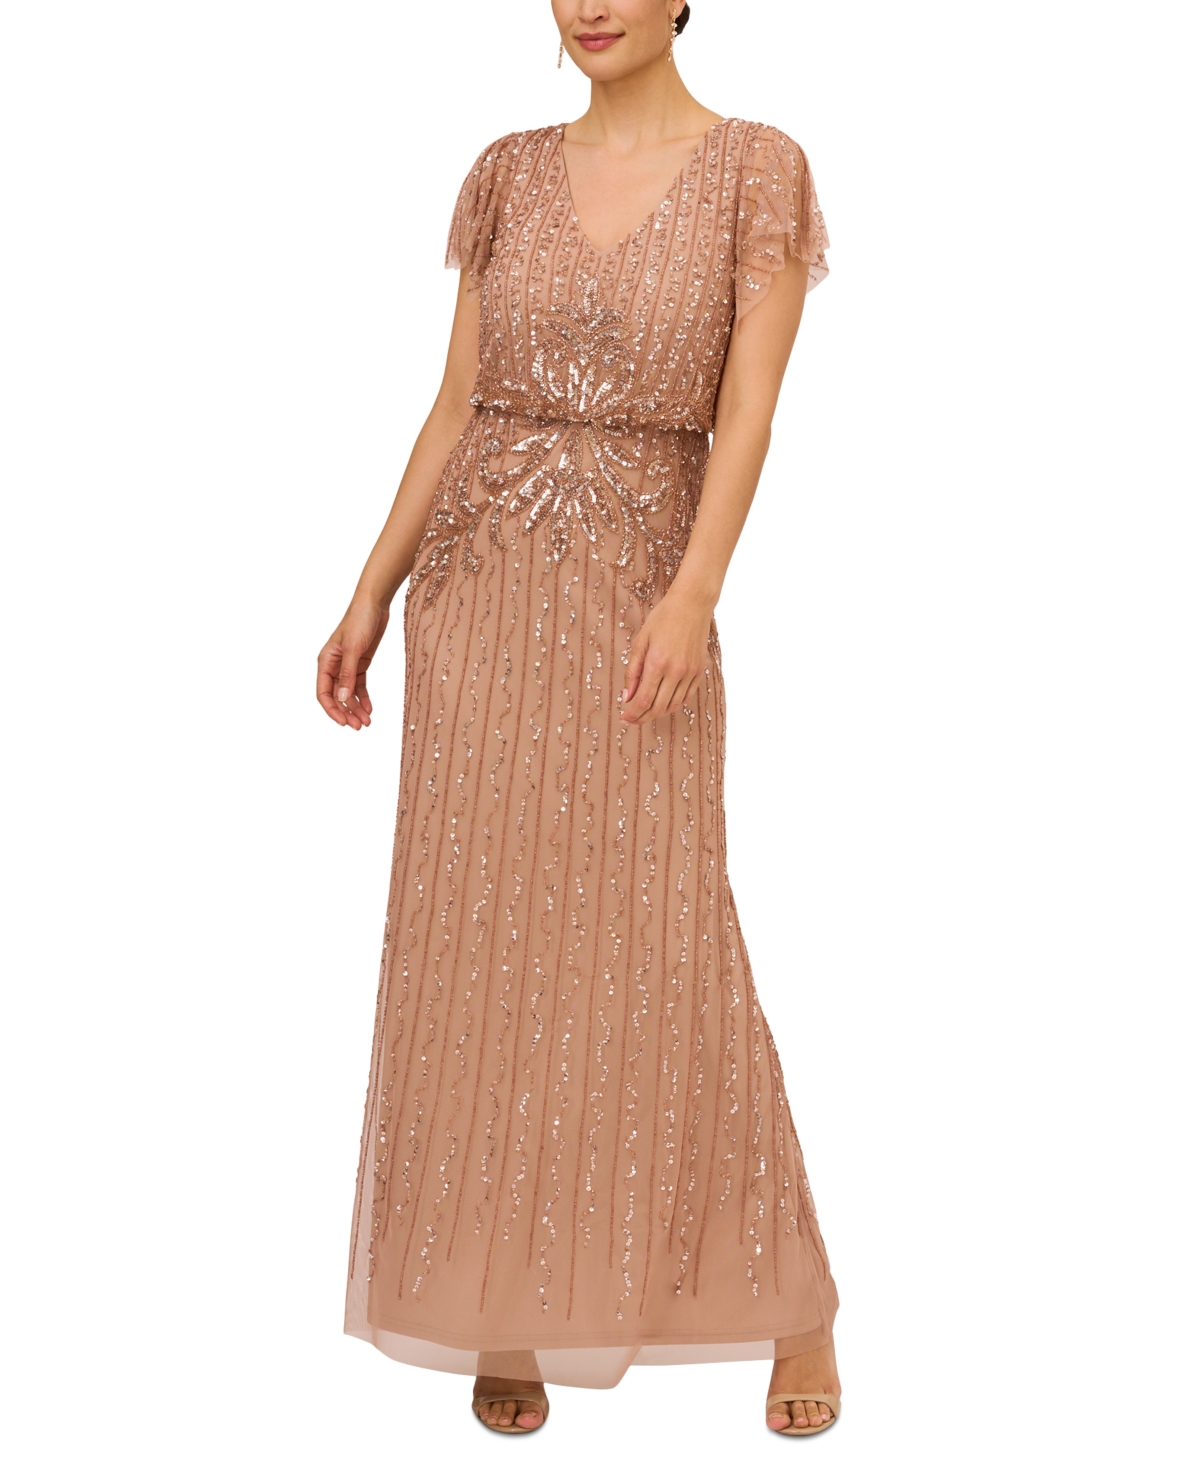 Downton Abbey Inspired Dresses Adrianna Papell Womens Beaded Flutter-Sleeve Gown - Rose Gold $249.00 AT vintagedancer.com